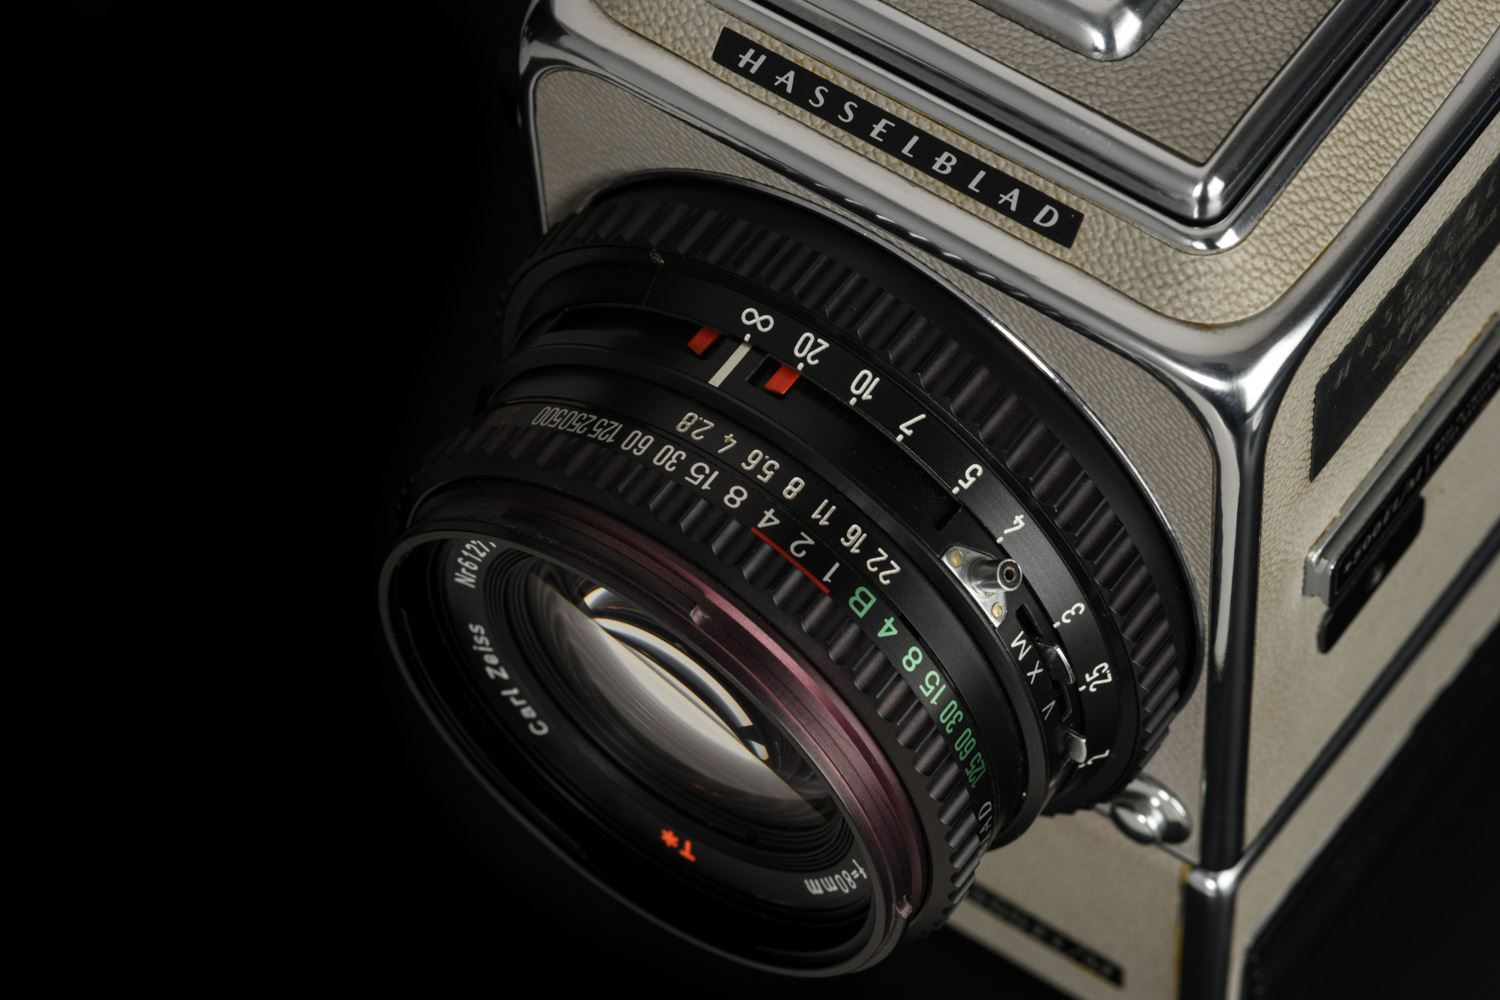 Picture of Hasselblad 500EL/M "20 Years in Space"